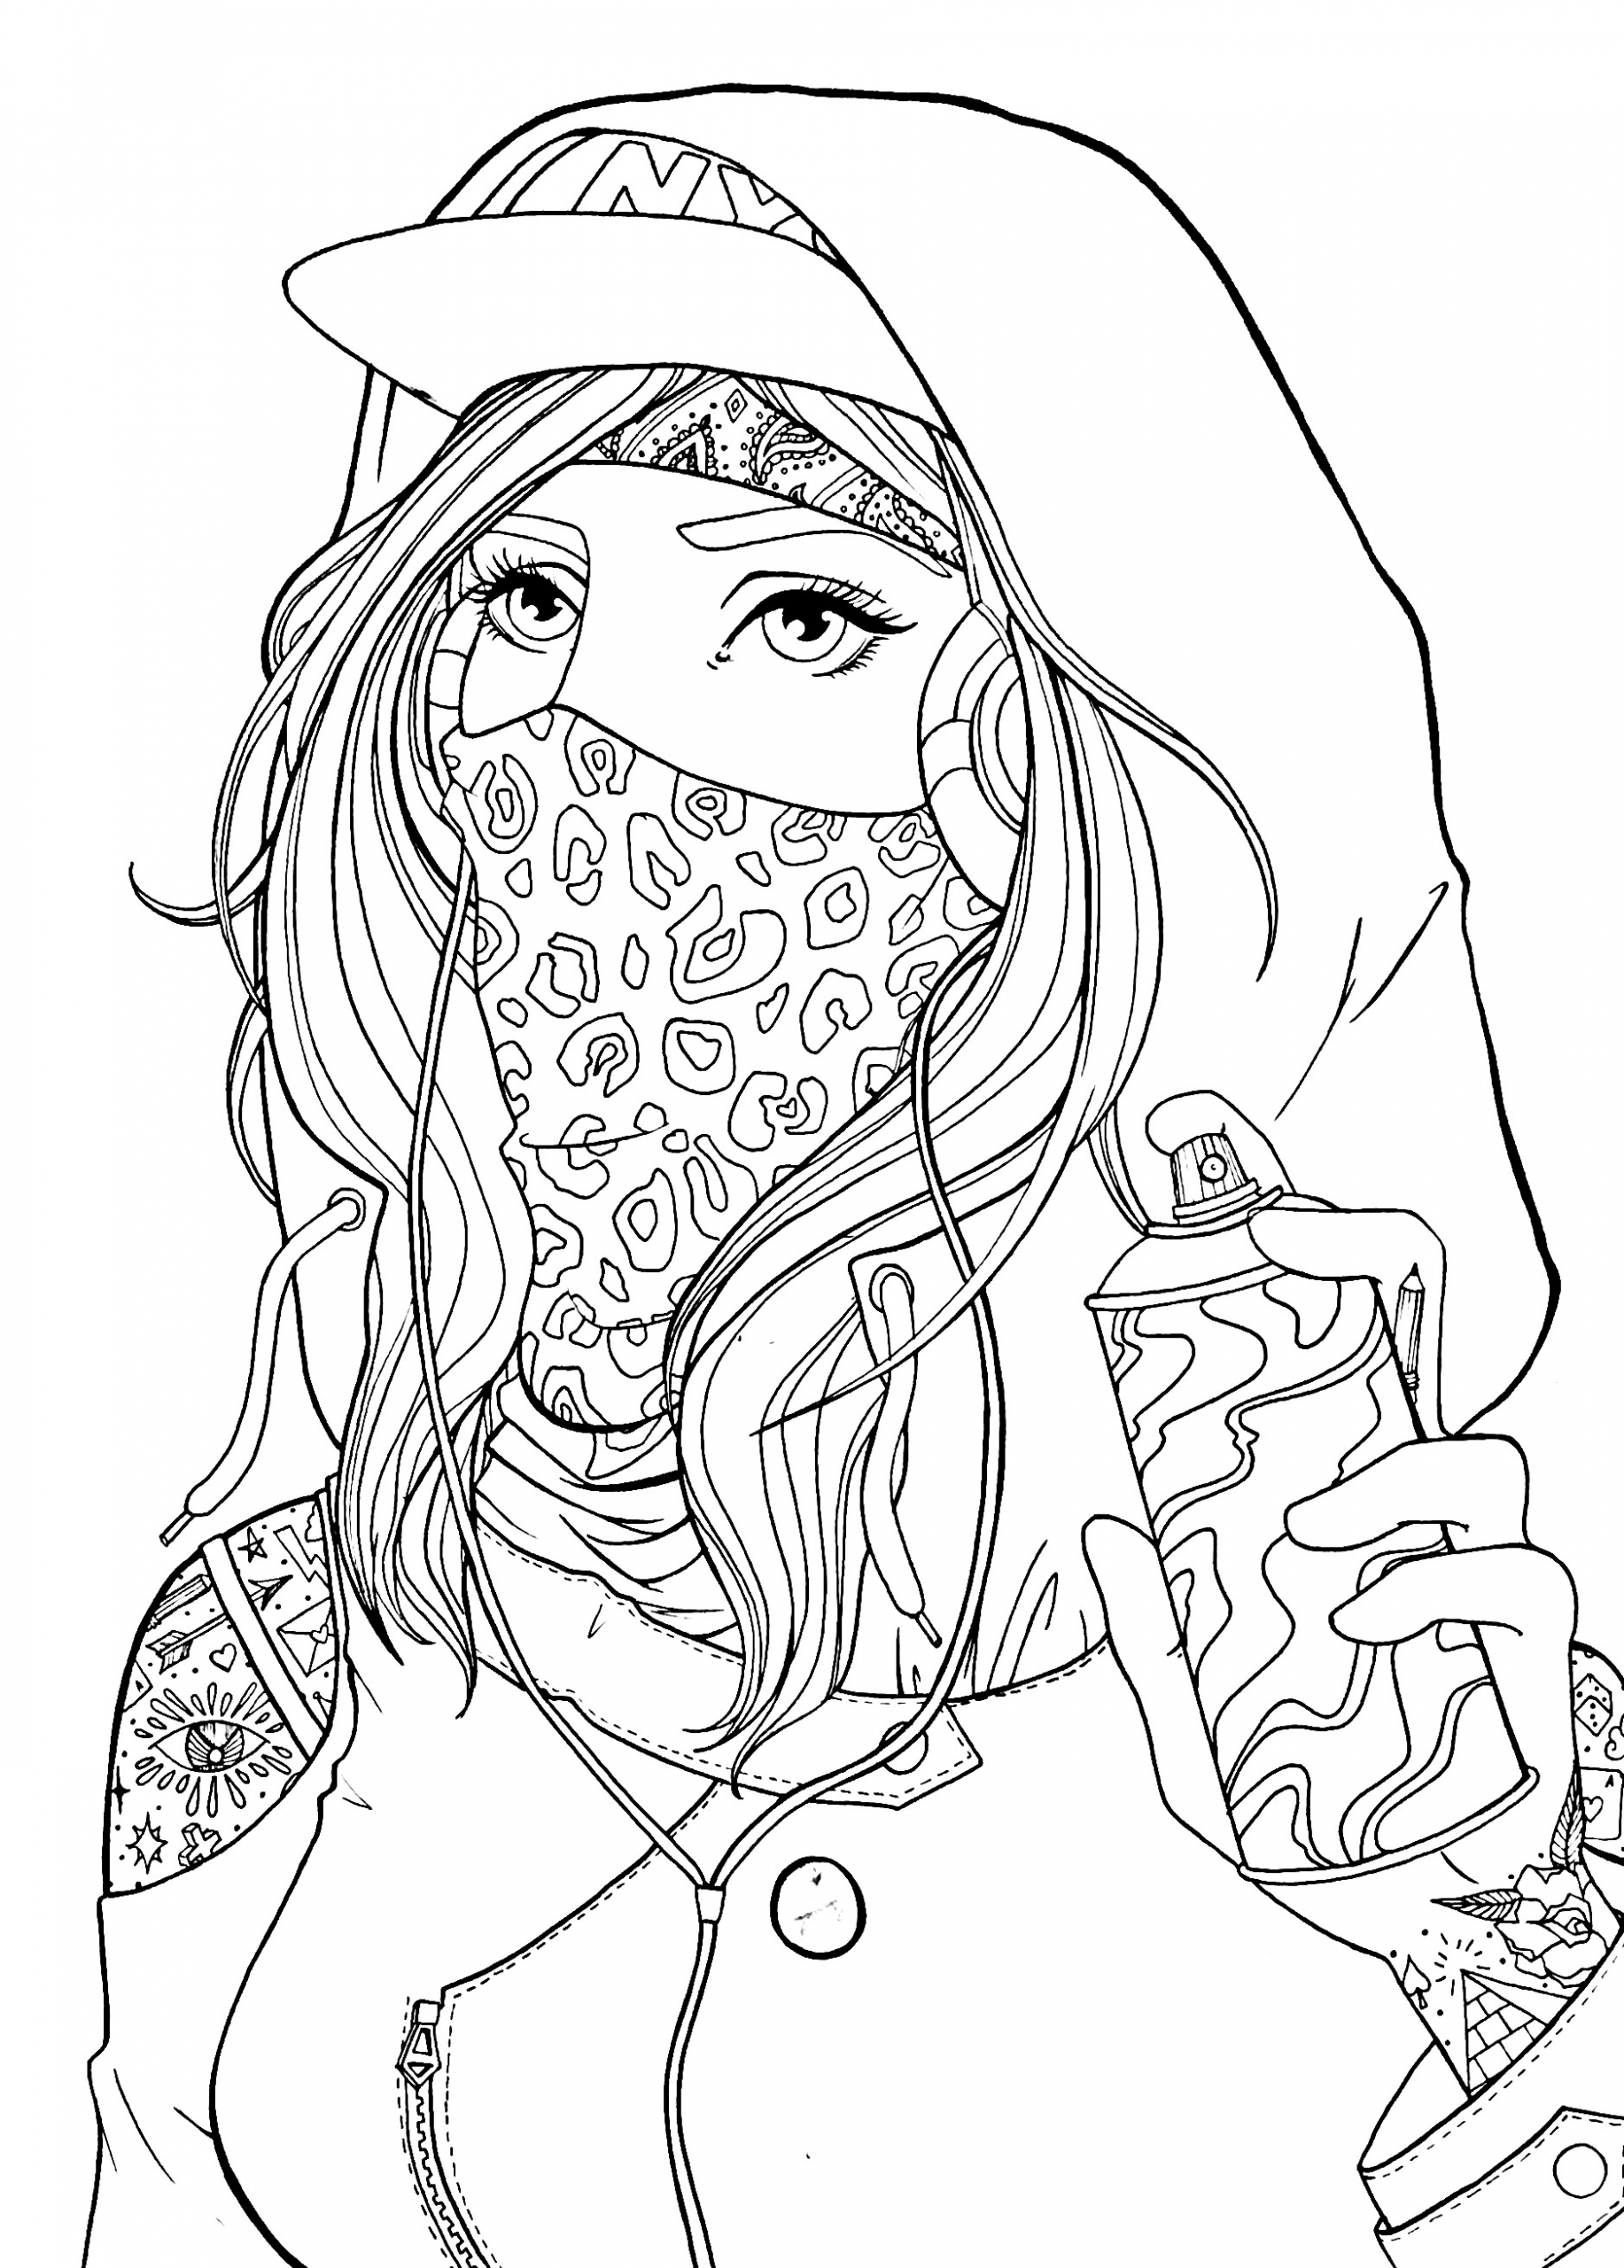 Coloring Book Pages Girls
 Graffiti girl drawing lineart